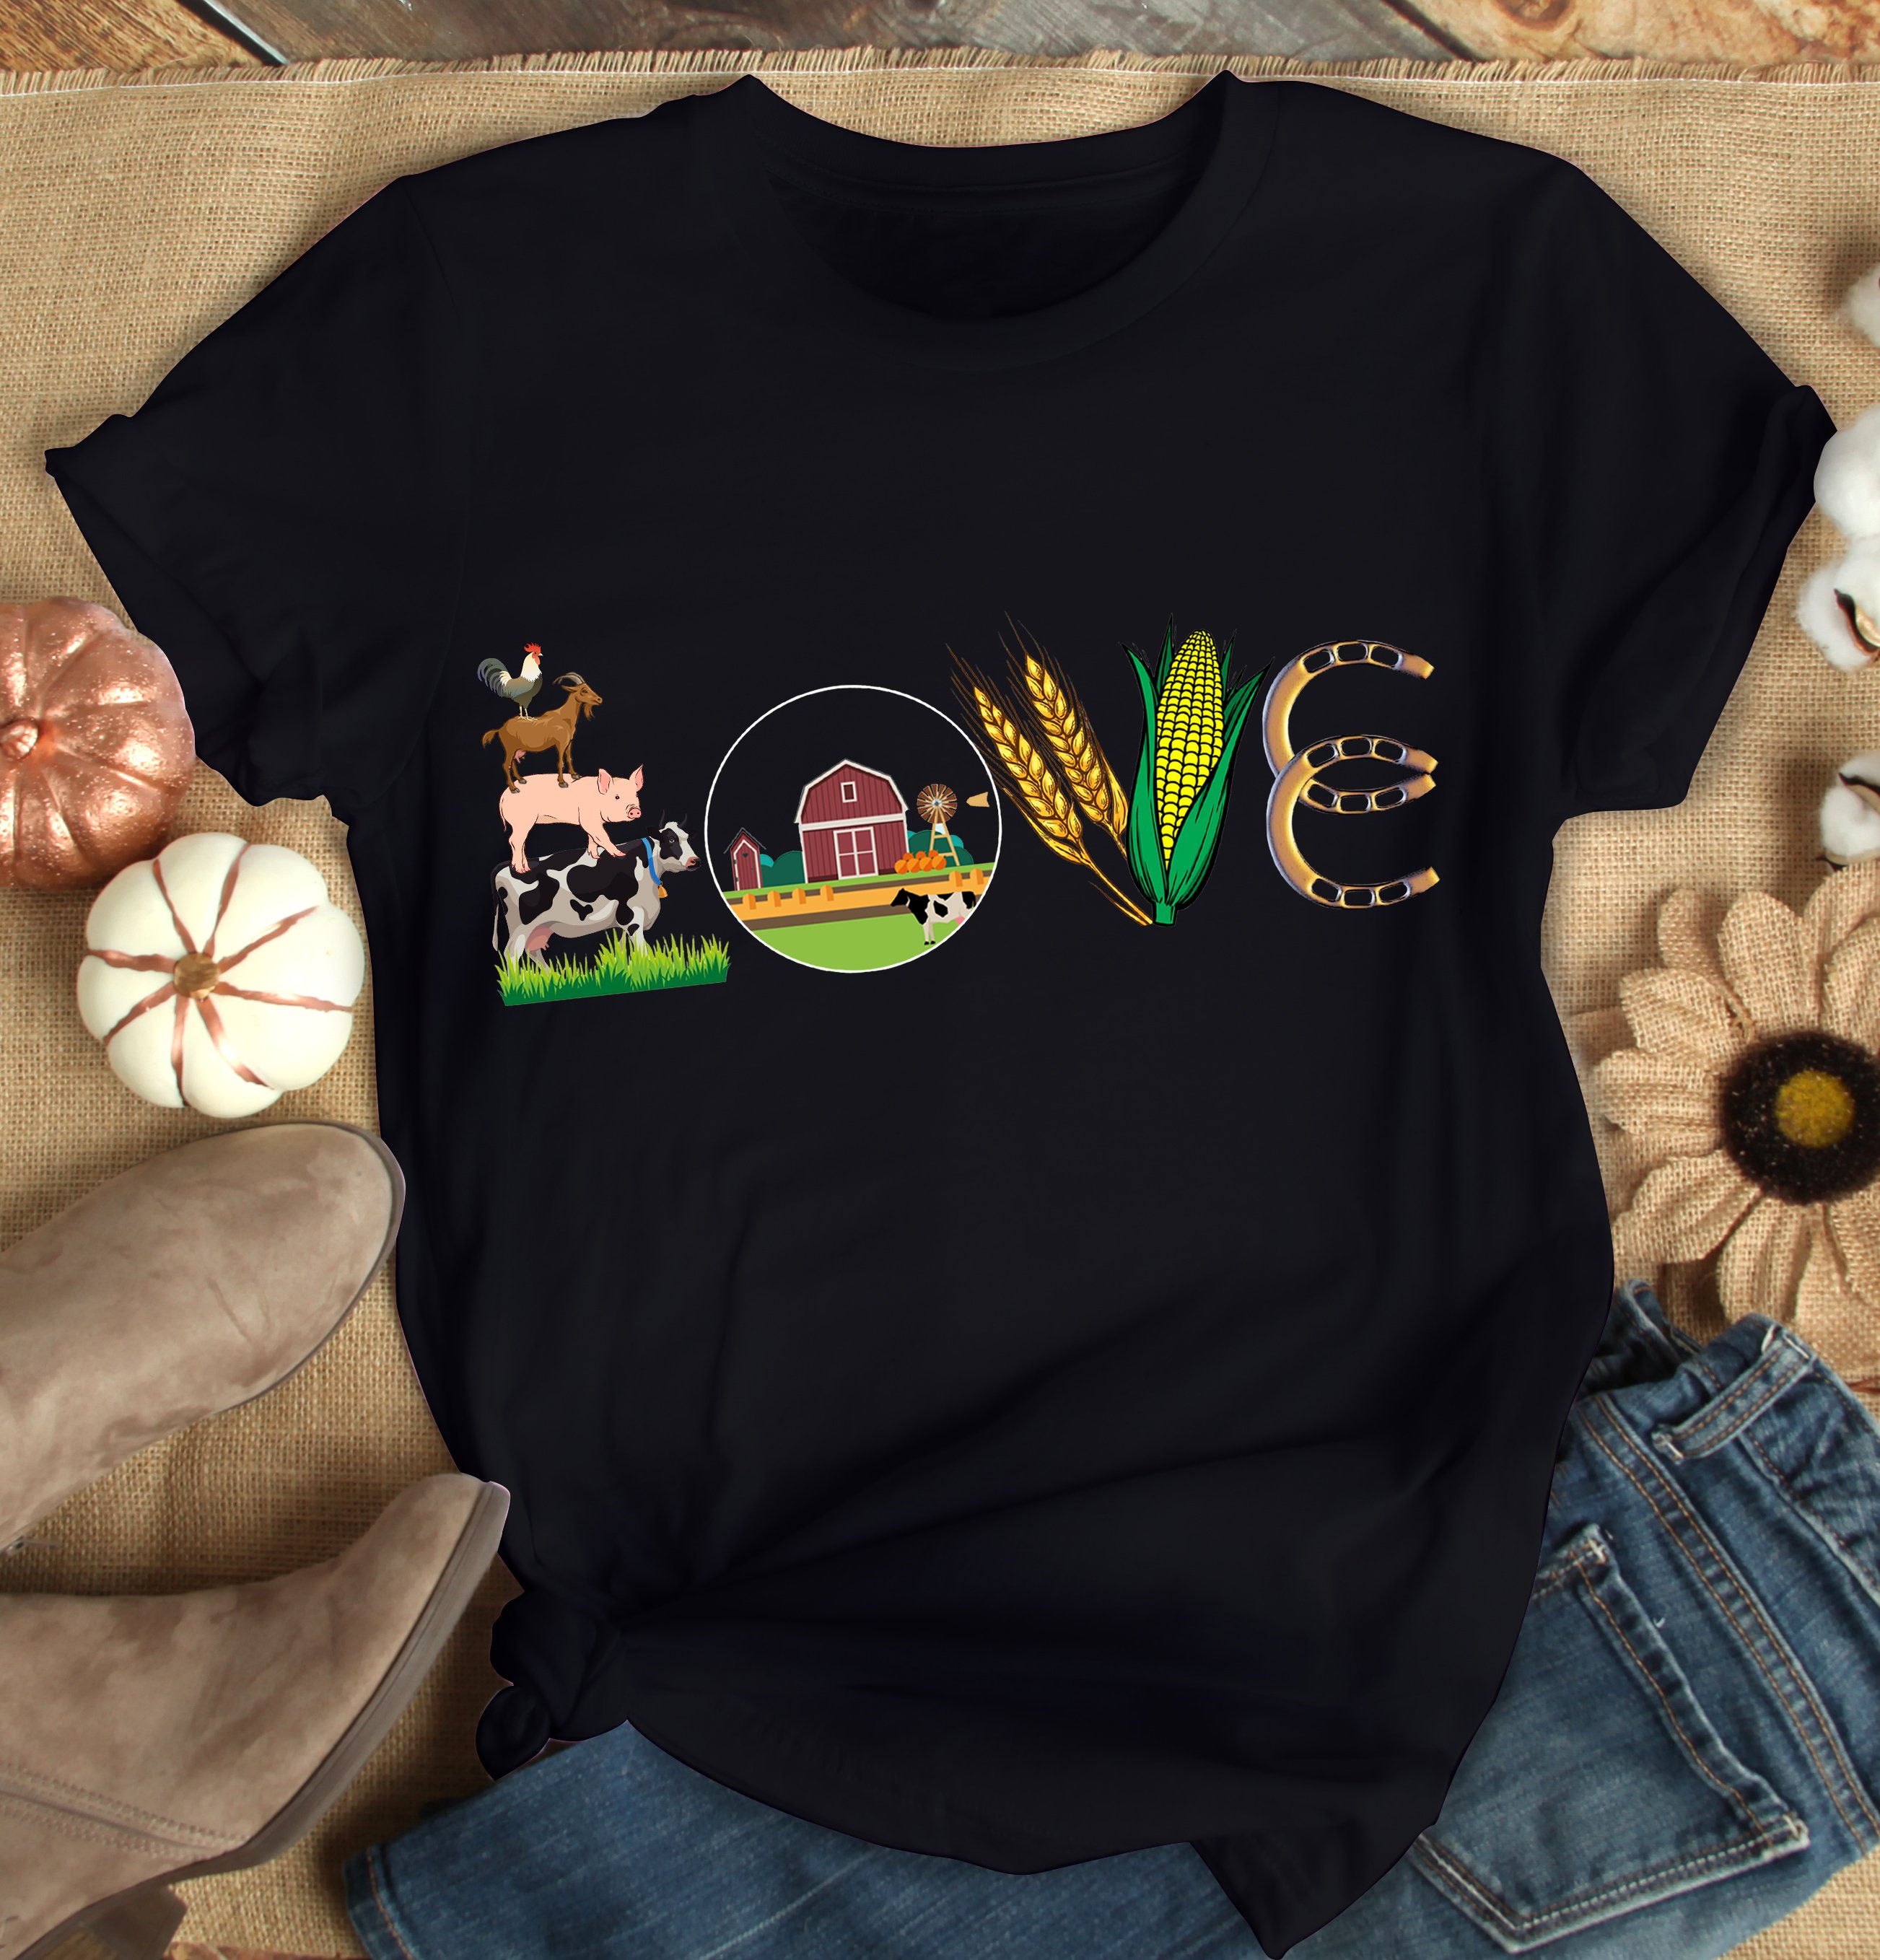 T Shirt Mother’s day Father’s day unique gift ideas for mom & dad from daughter & son kids, meaningful birthday presents –  Love Farm Unisex Tshirt